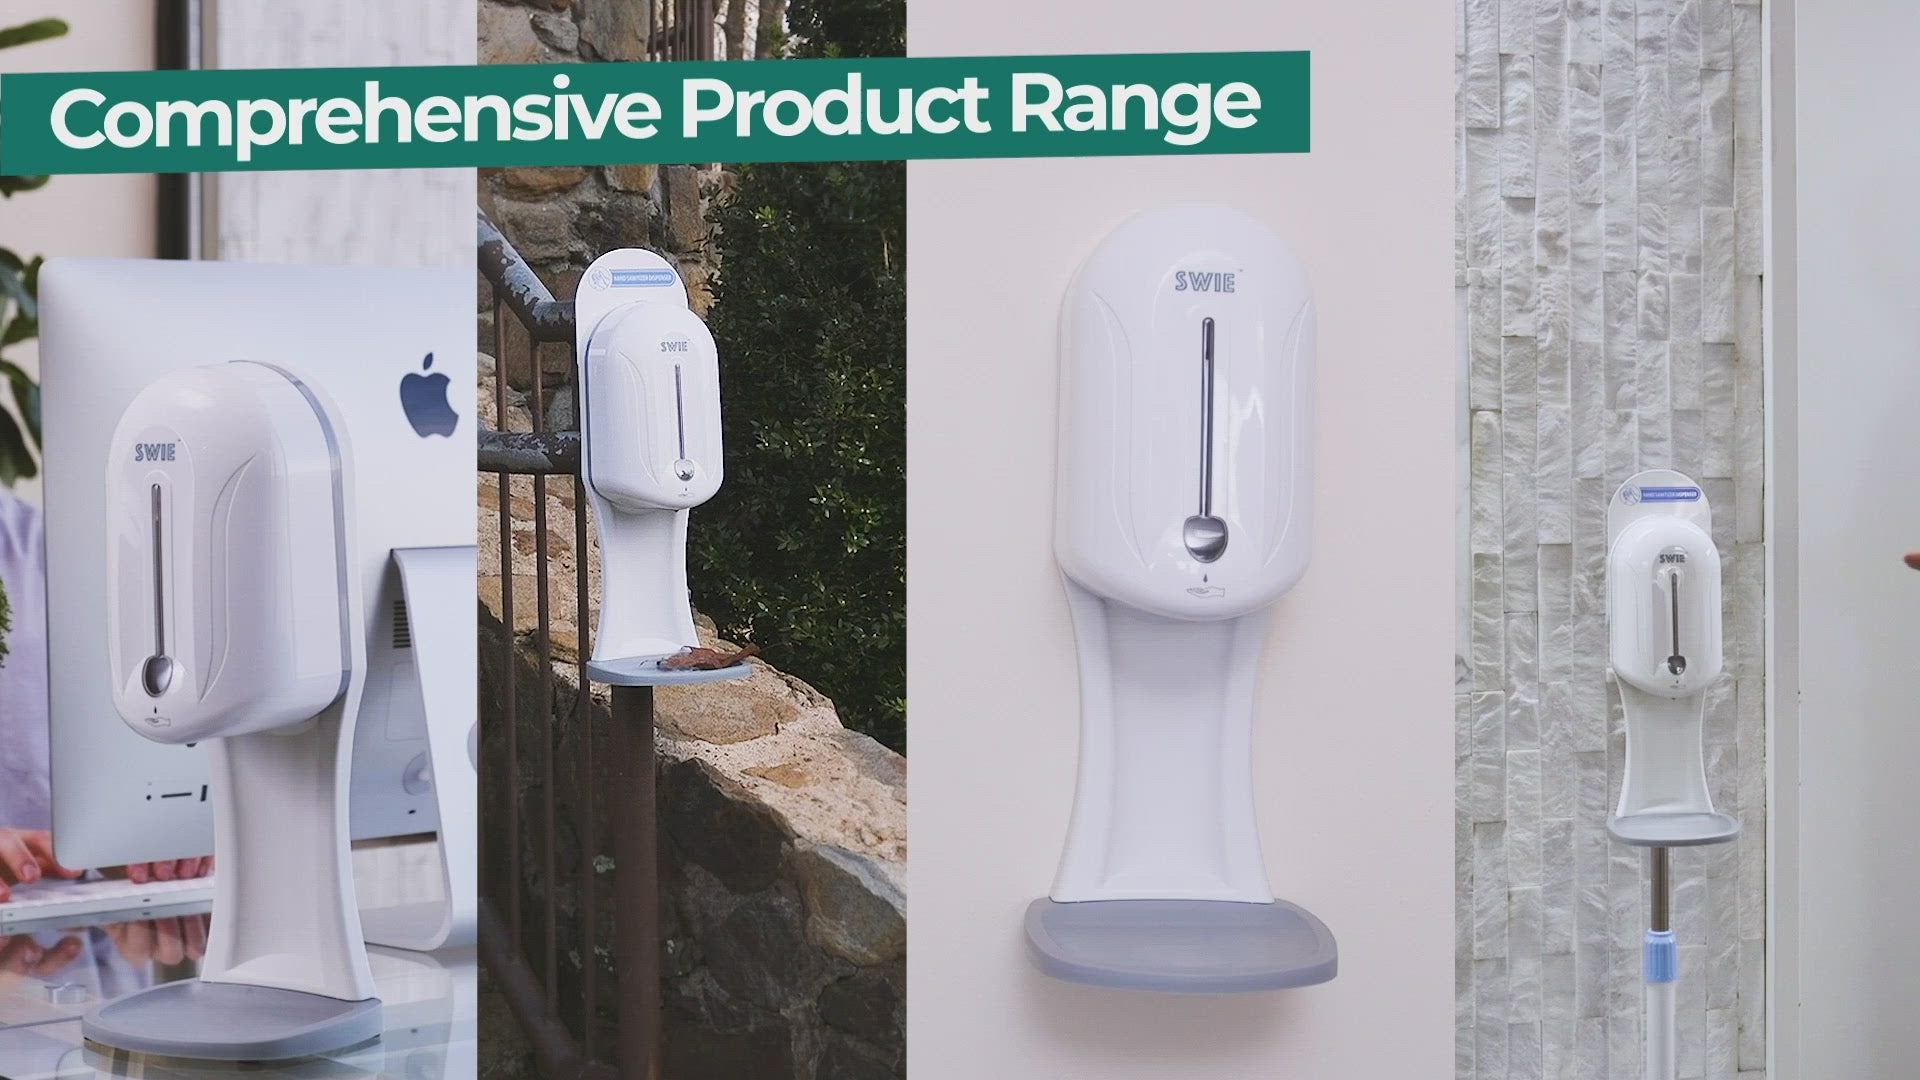 ALL-Weather Automatic Hand Sanitizer Station, Rain, Snow & Waterproof, Outdoor/Indoor